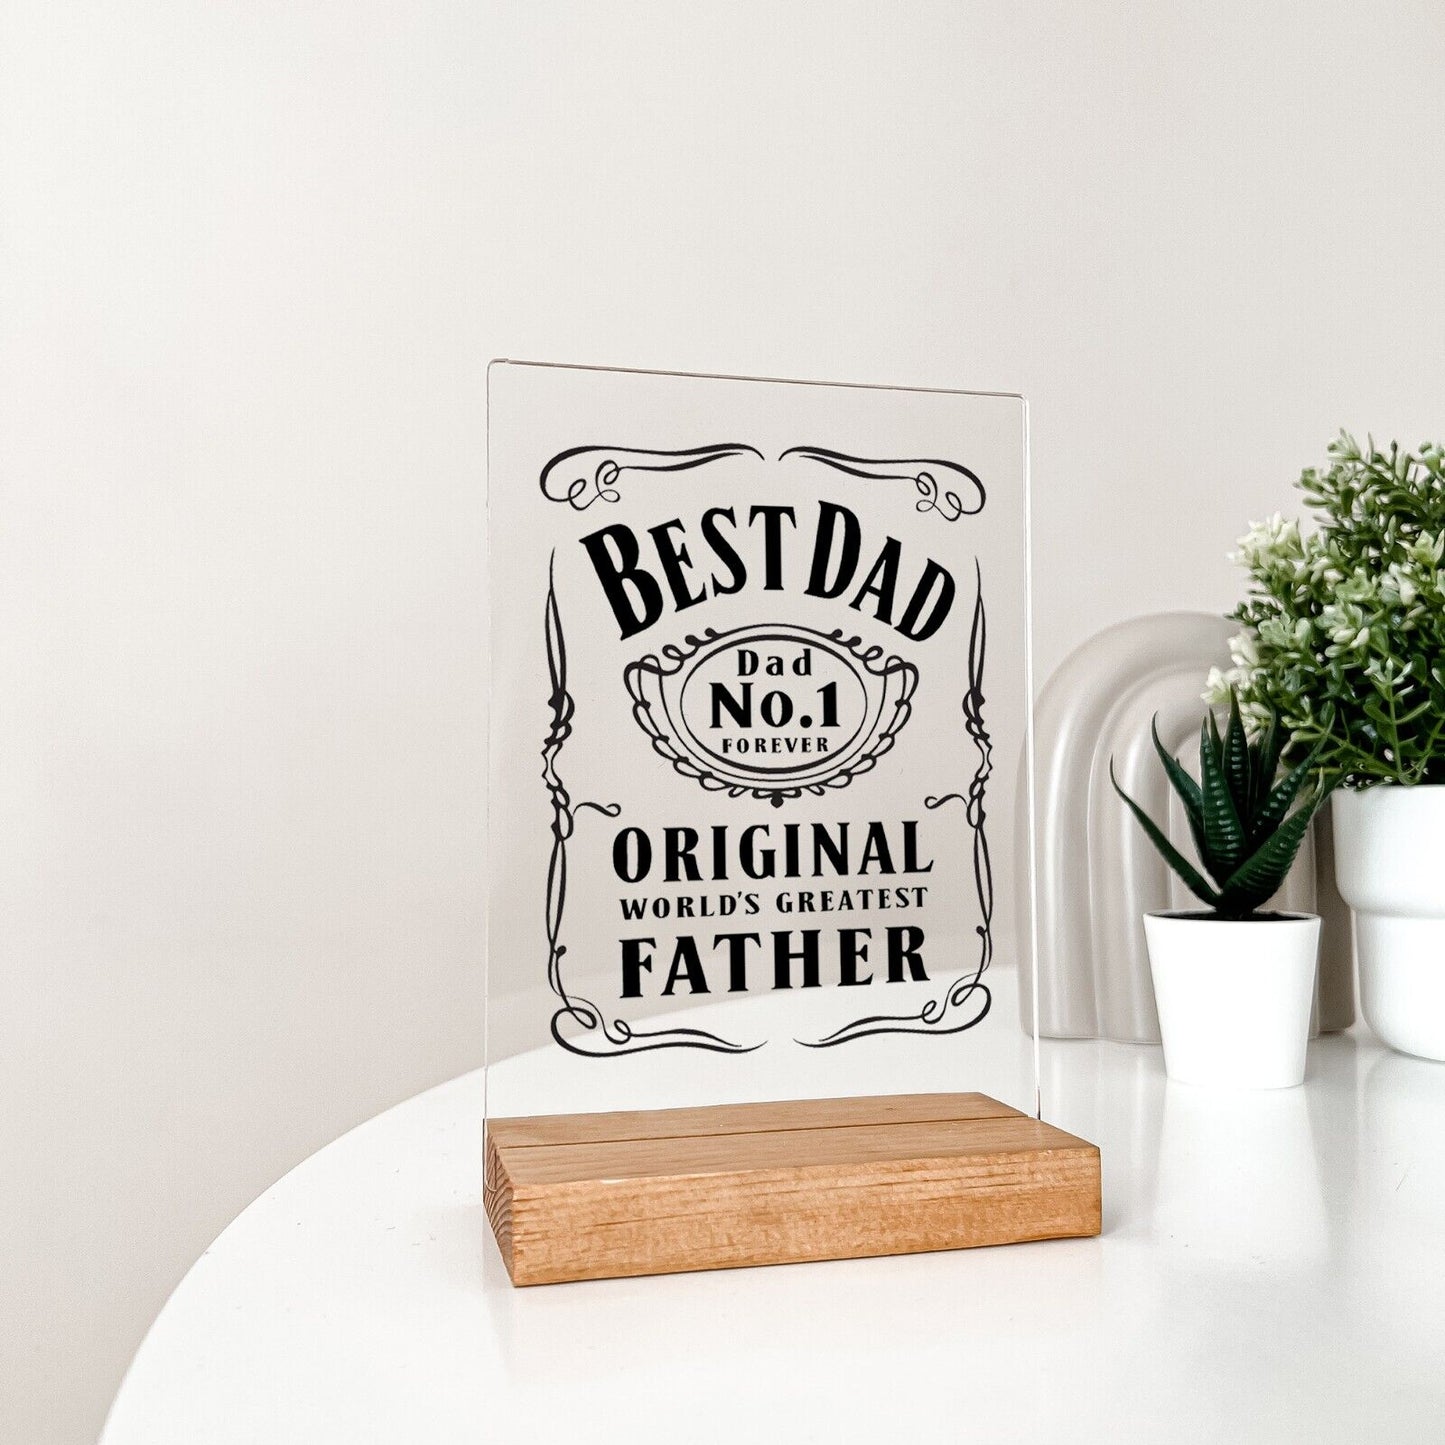 Personalized Wood Base Desk Table Stand Father's Day Best Dad Gift